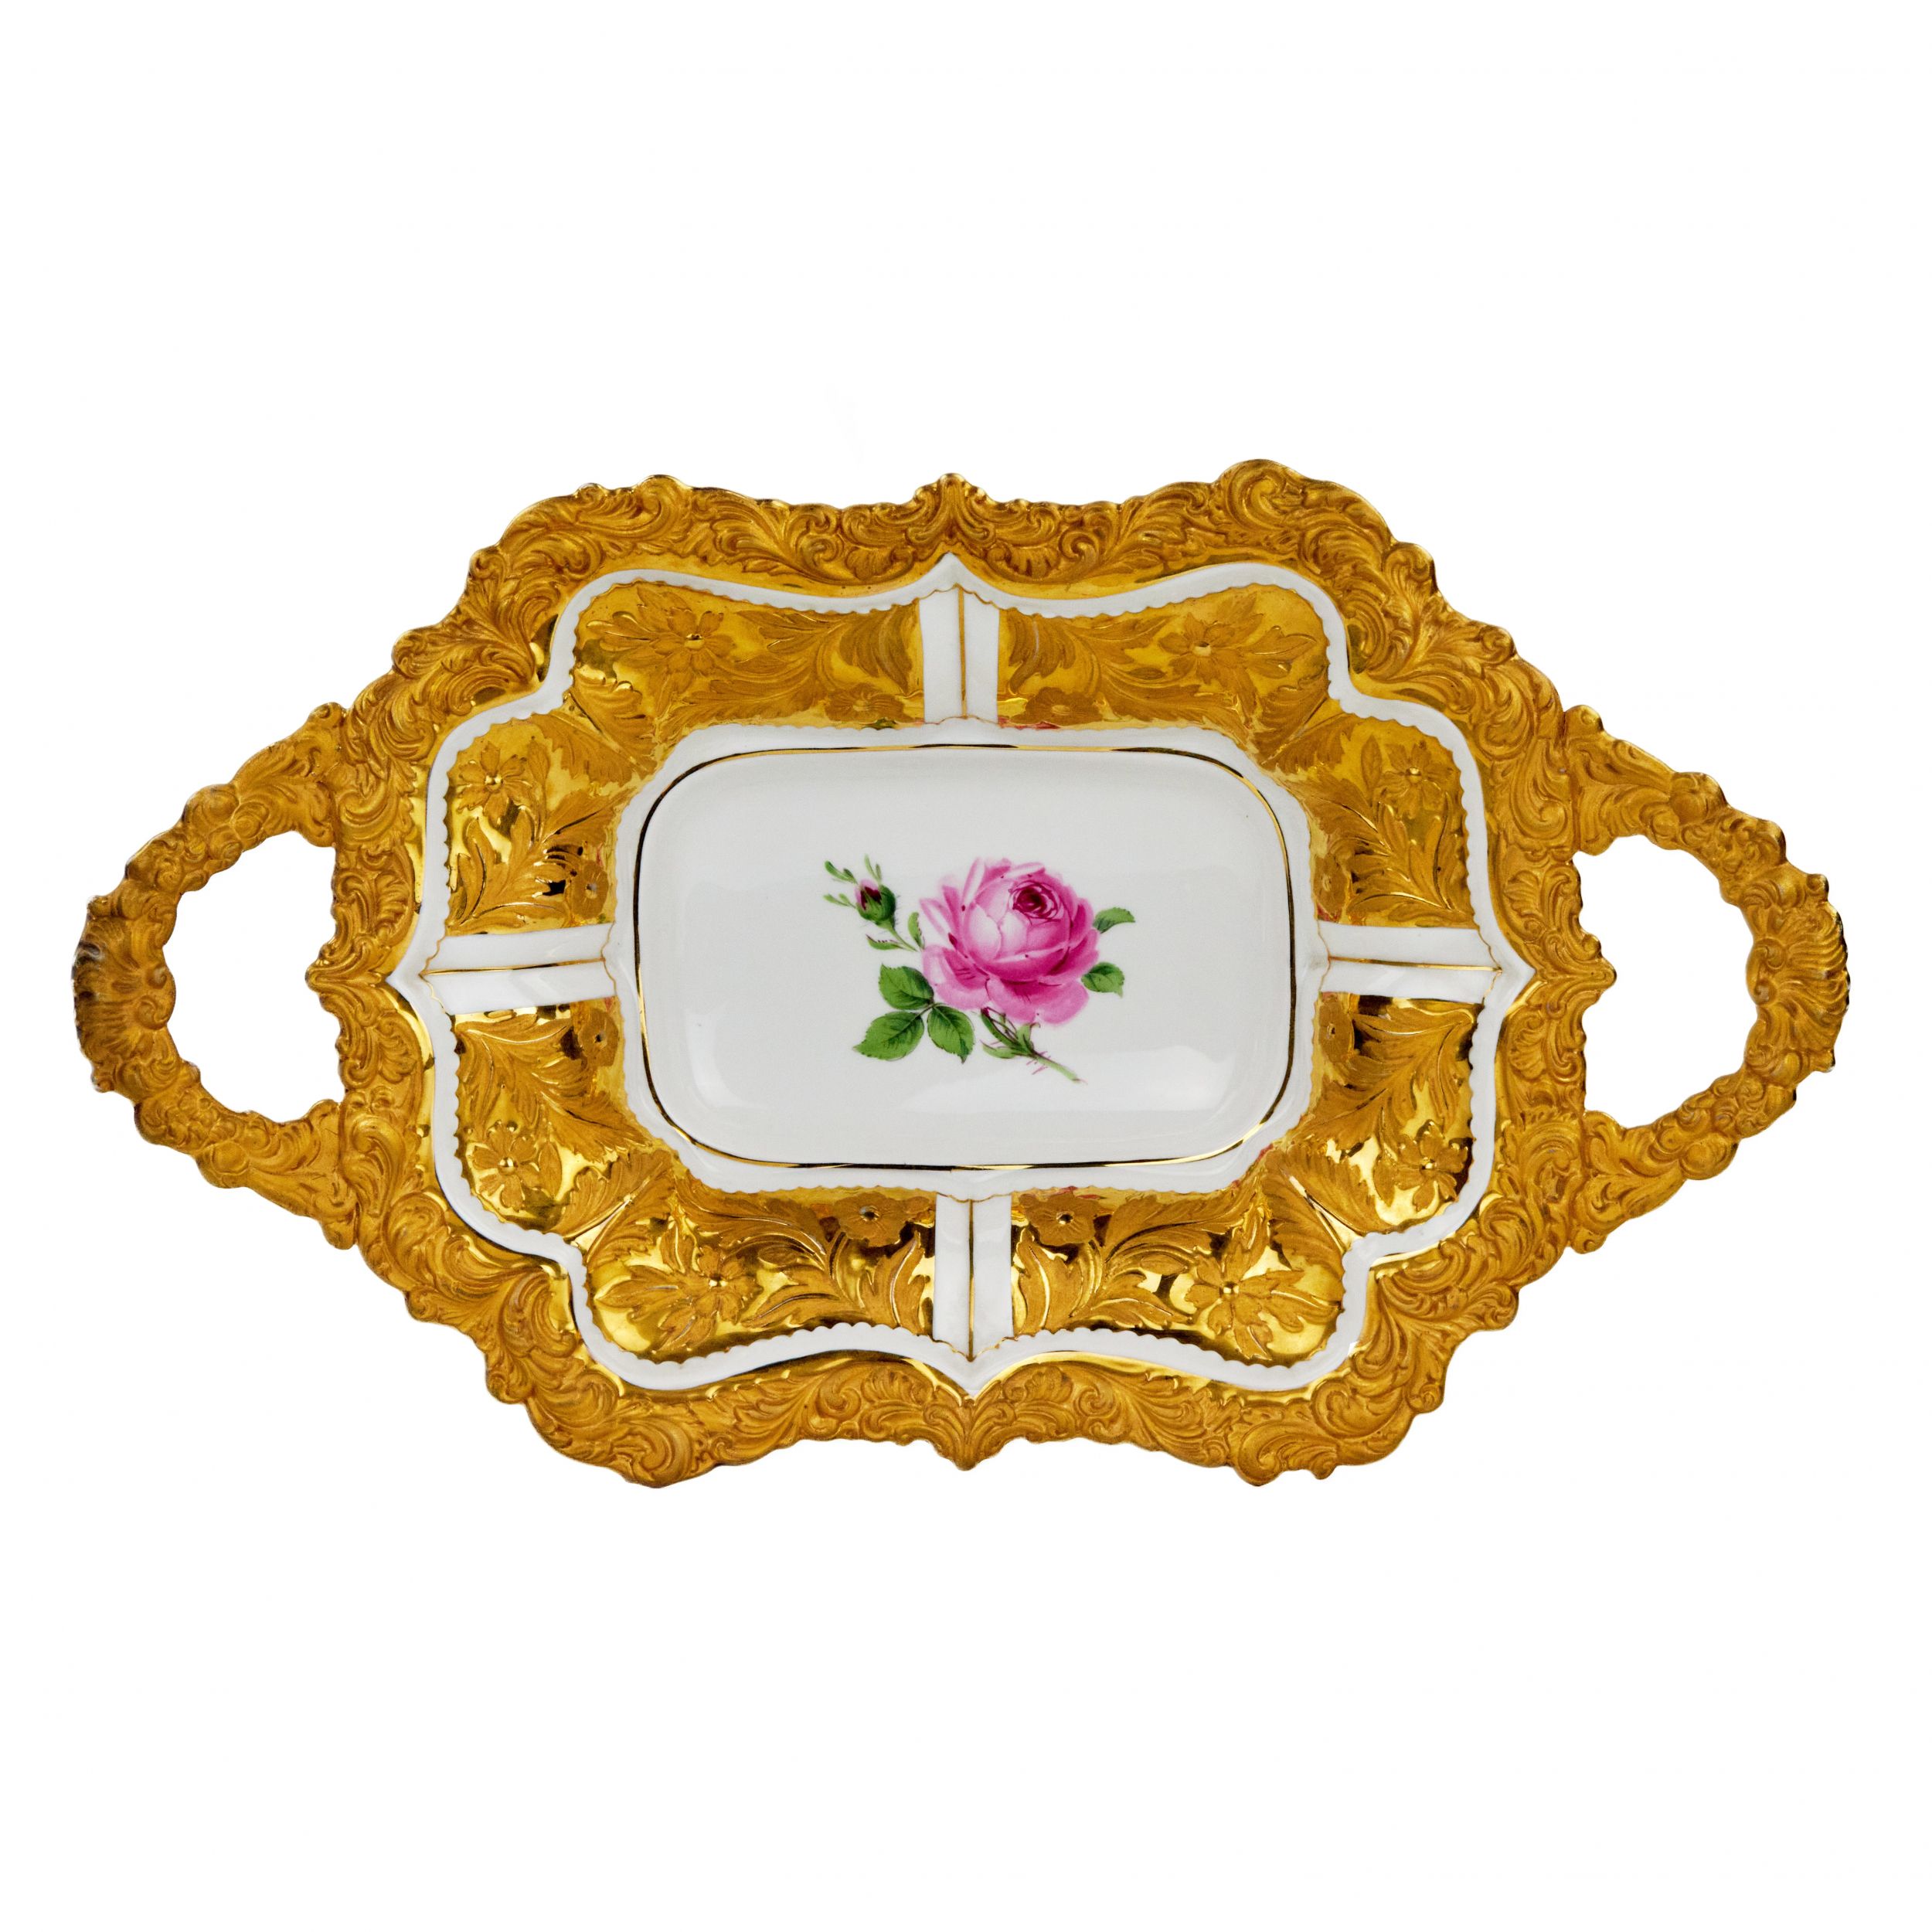 Painted-gilded-Meissen-dish-20th-century-